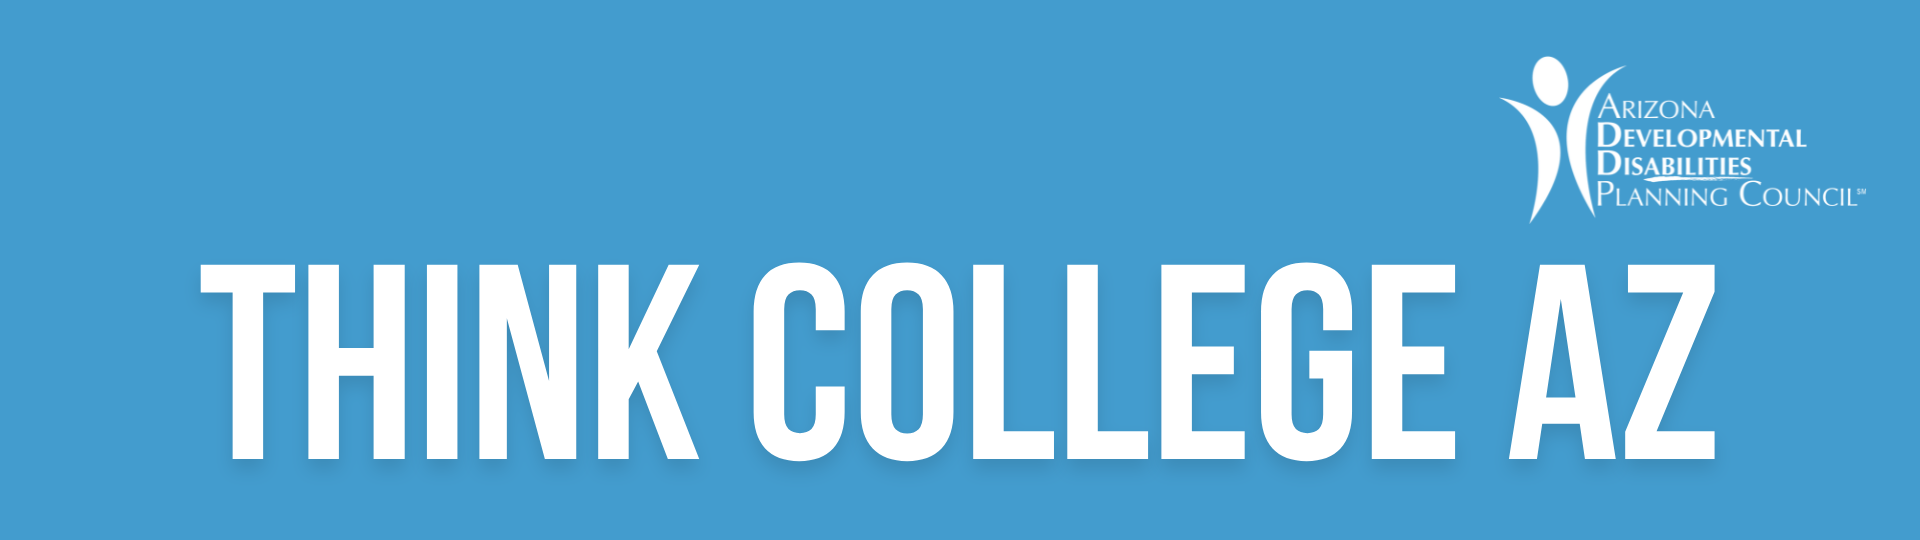 Think College AZ text is white with blue background